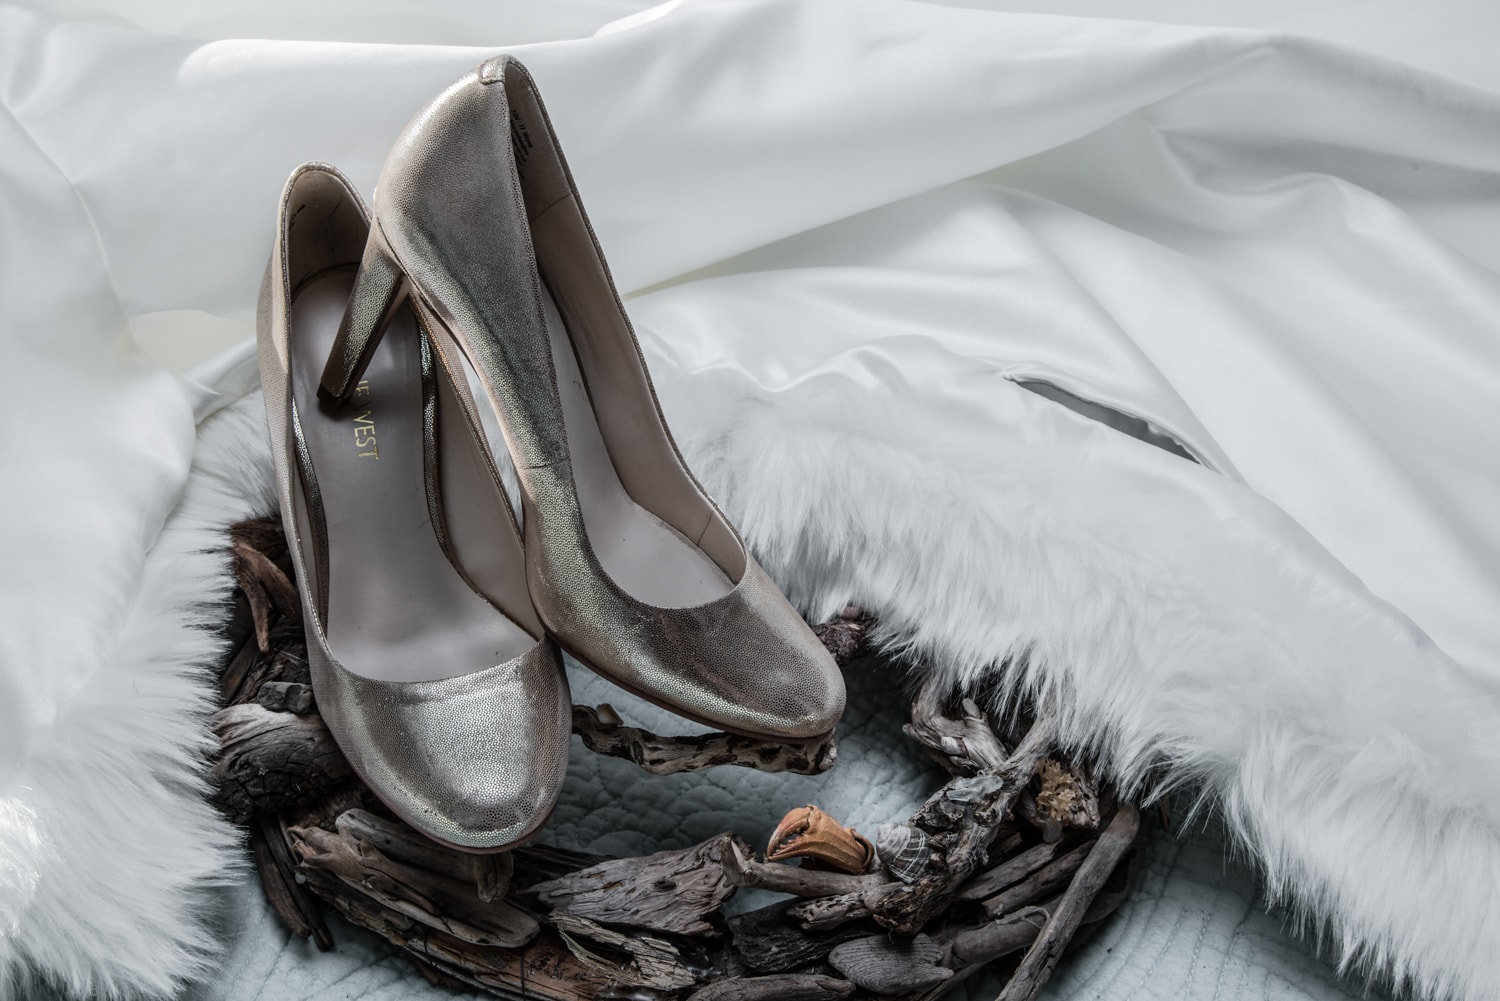 The bride's winter wedding shoes with fur cape.